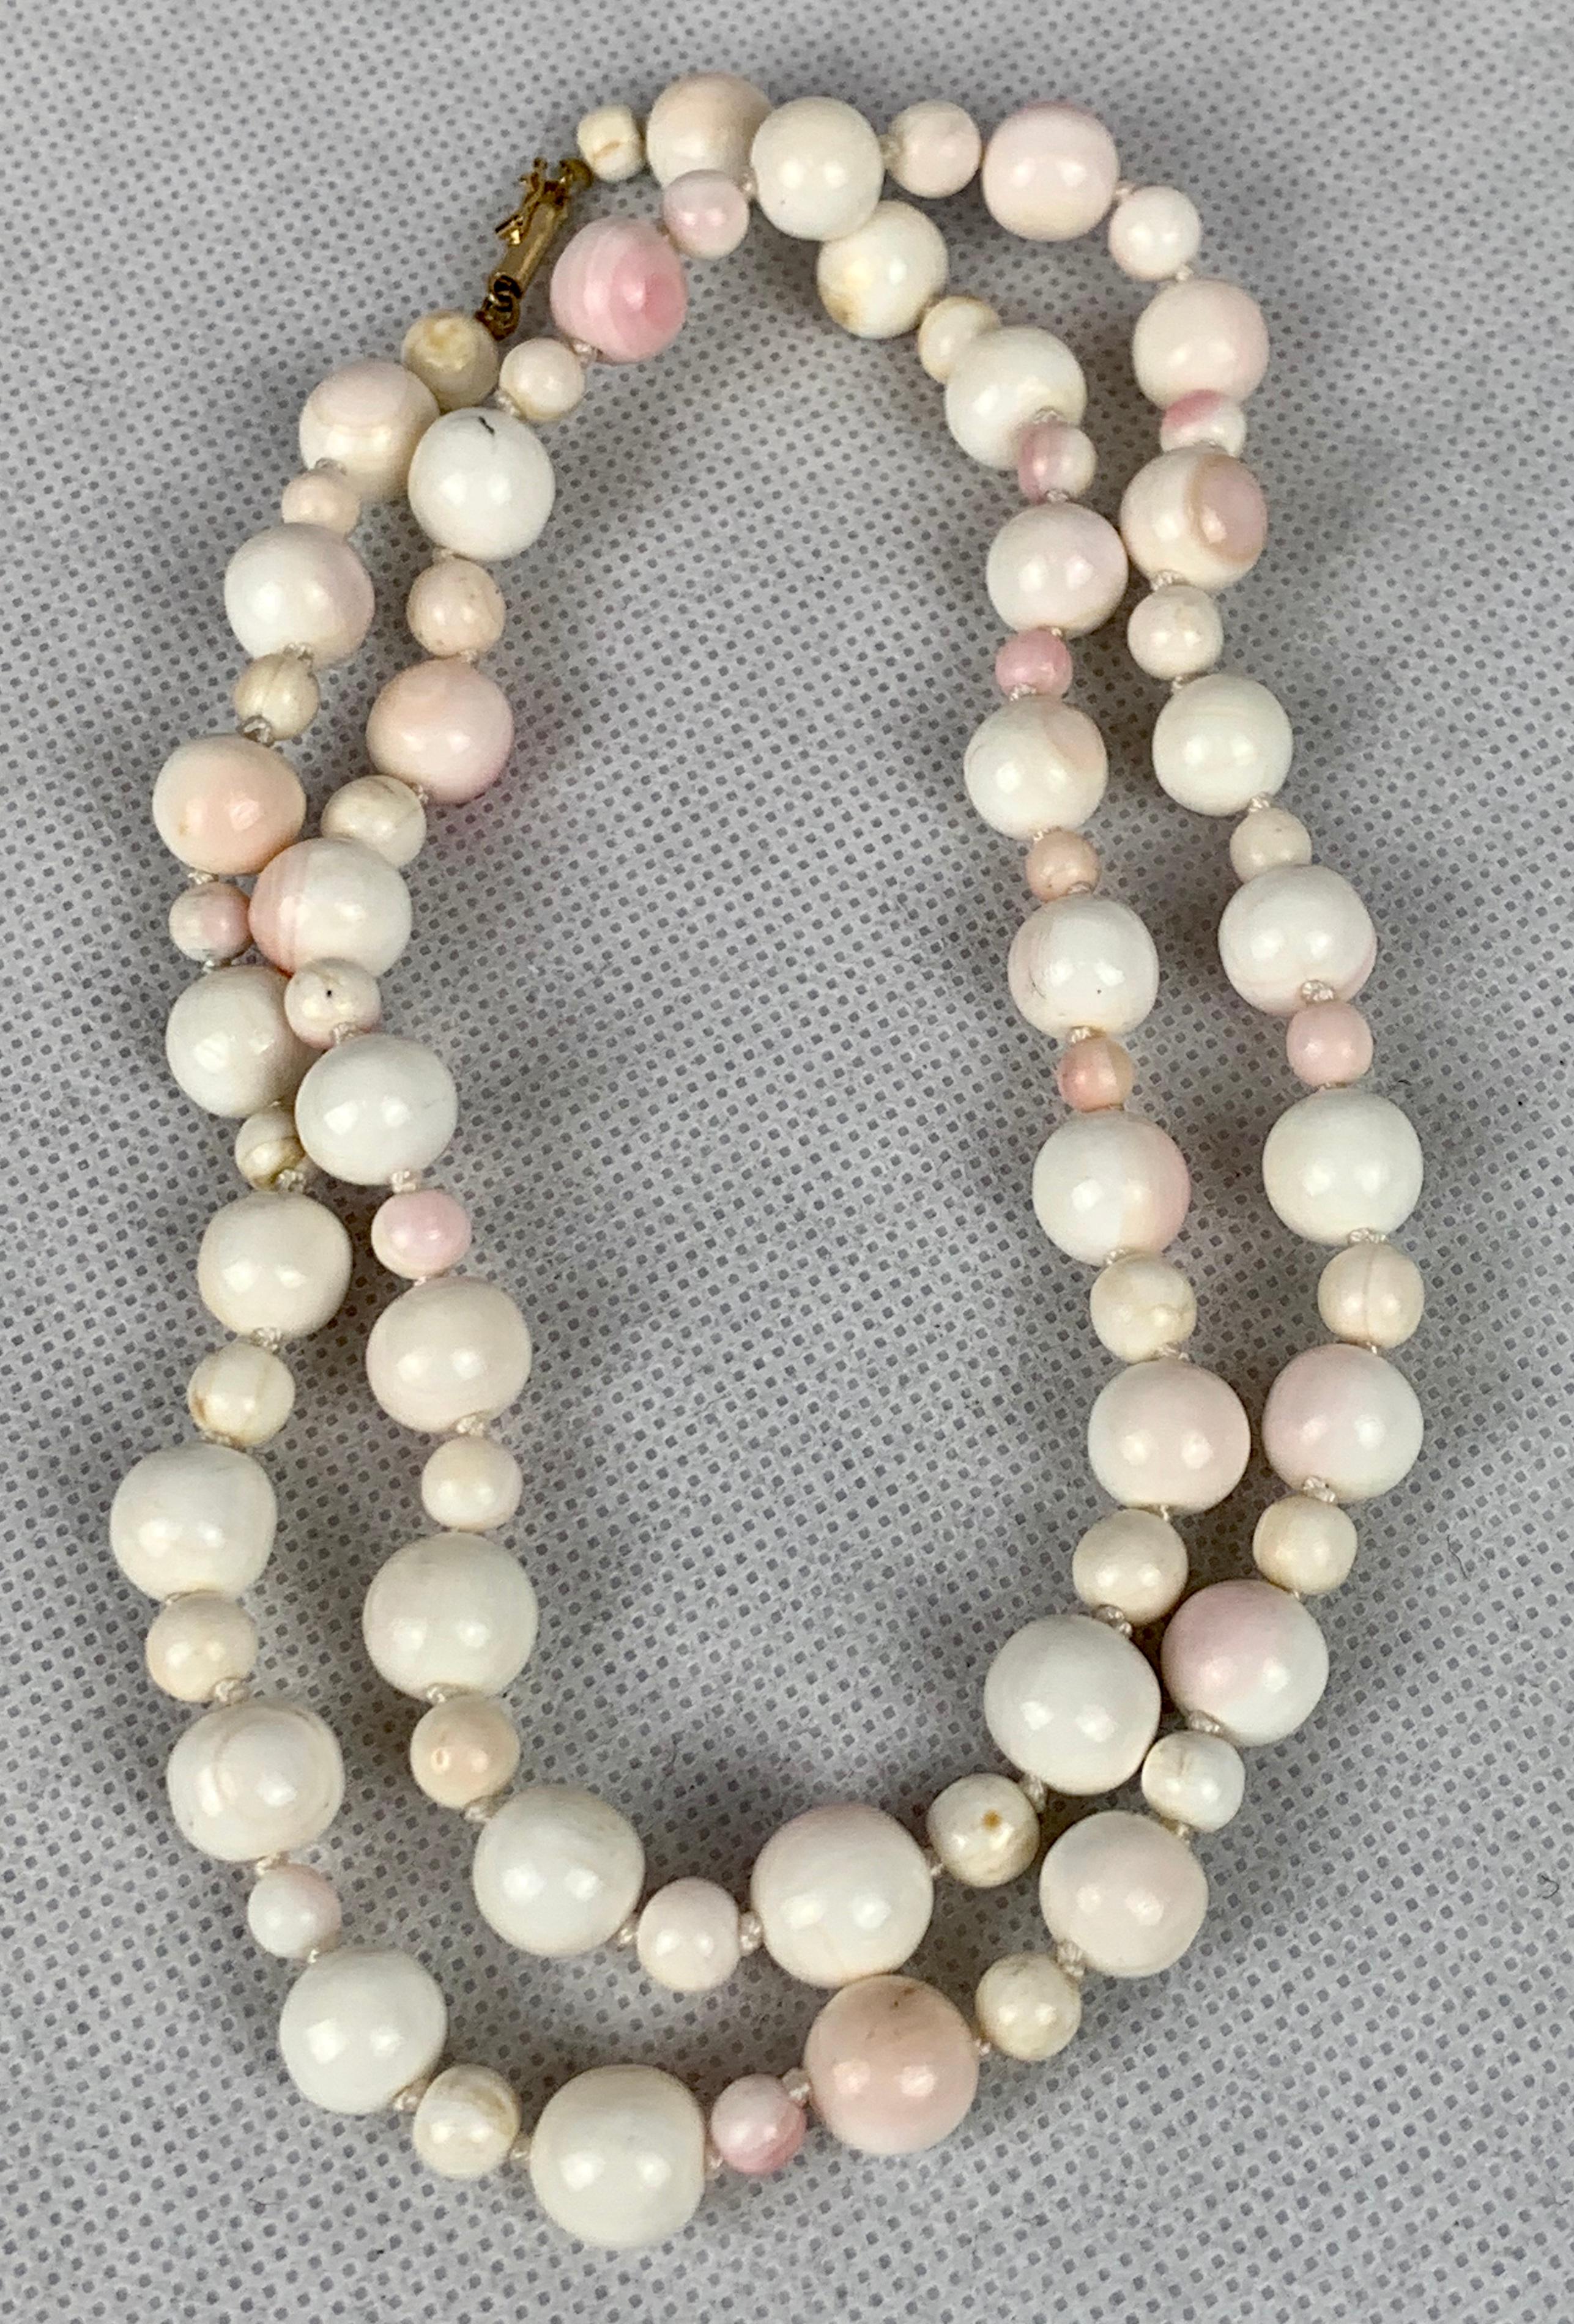 Vintage angel skin coral beaded necklace newly hand knotted on silk and freshly polished.  The design is a large and small bead in alternating order.  The clasp is a 14k yellow gold barrel clasp.   